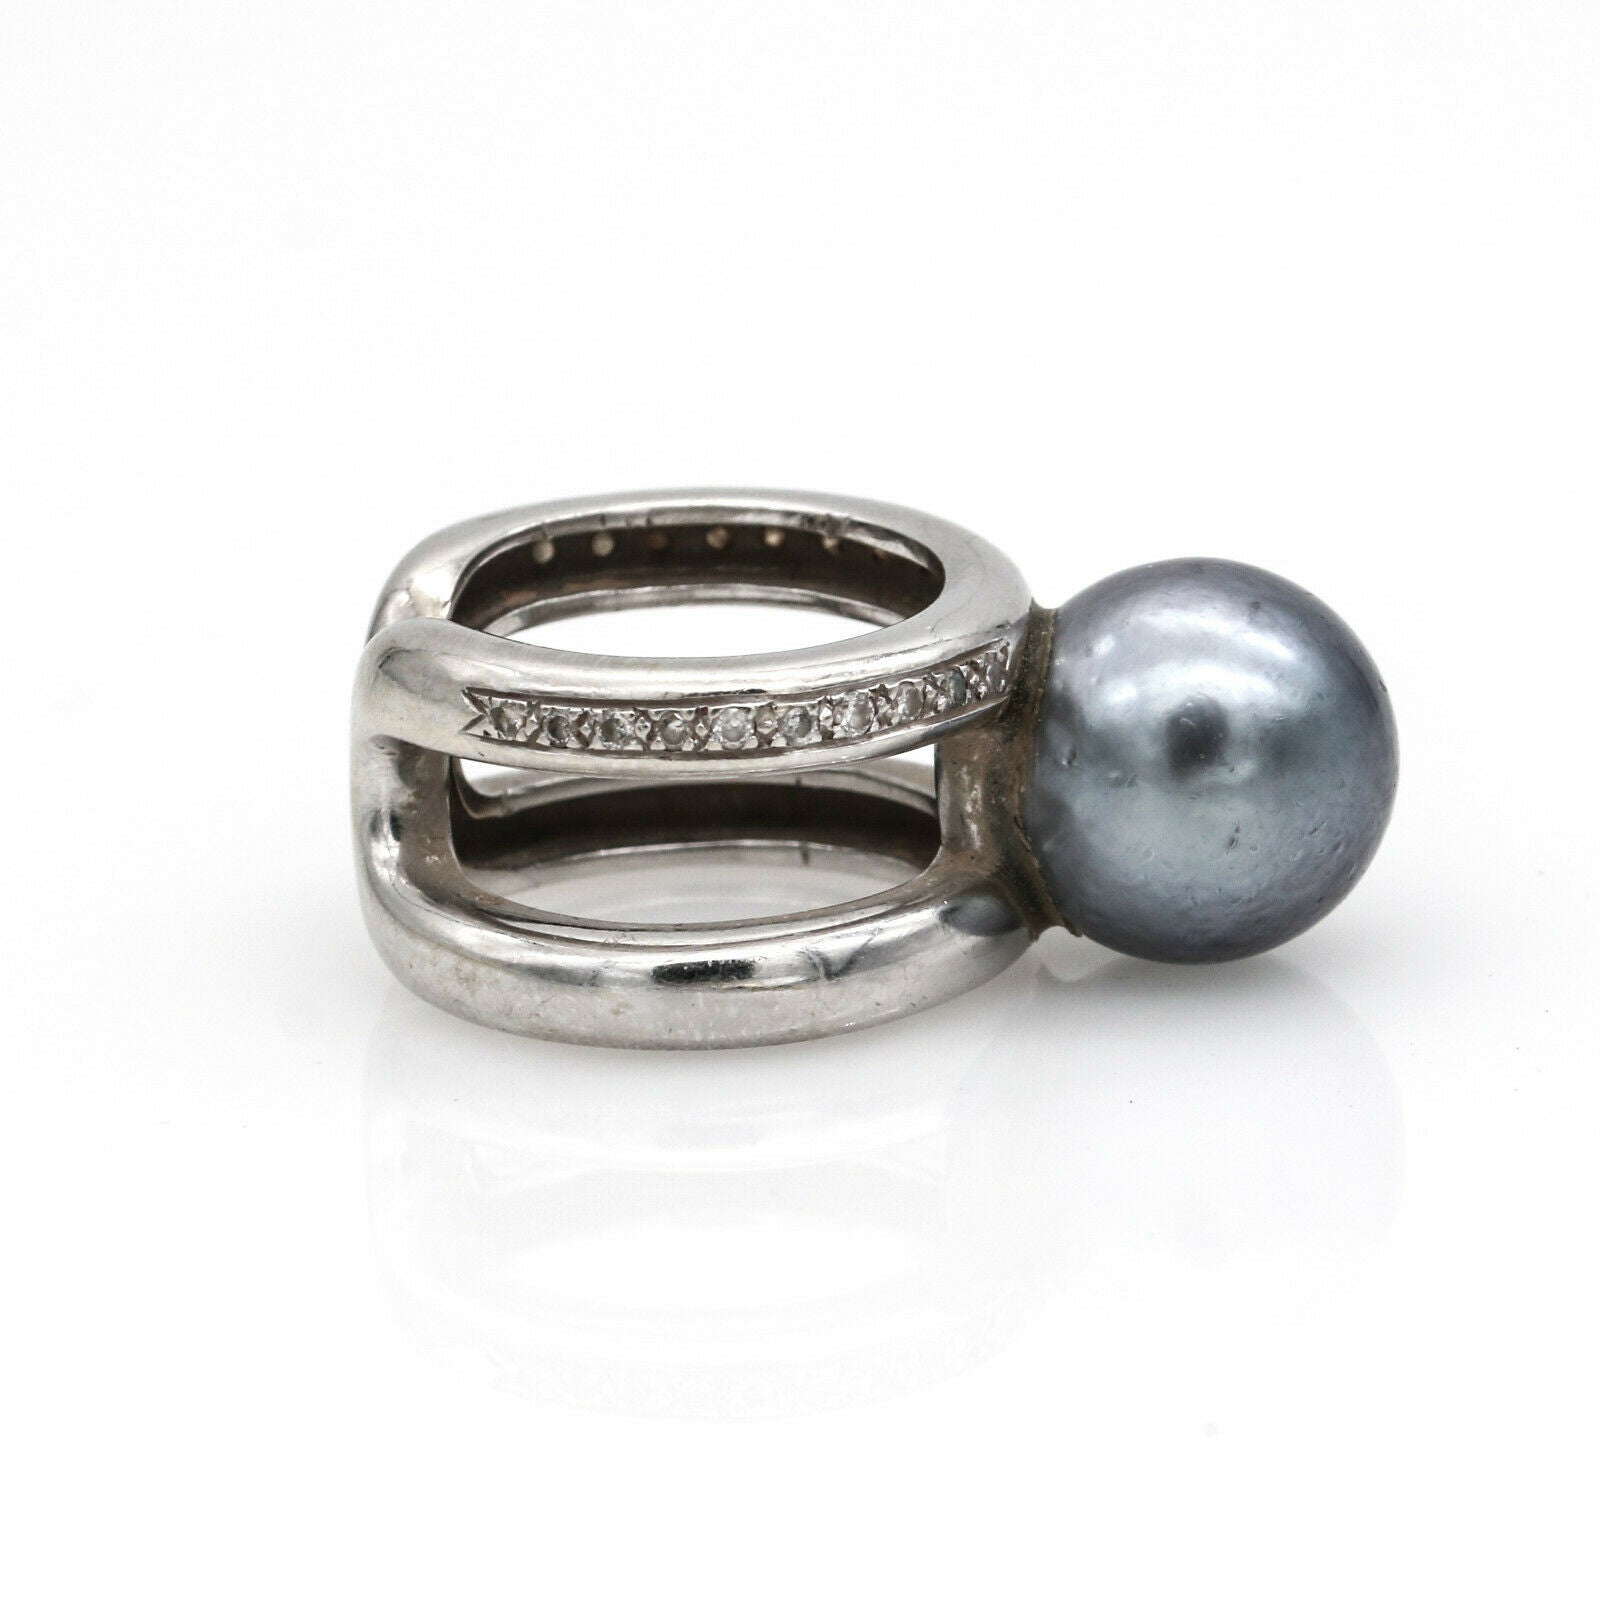 13mm Tahitian South Sea Pearl and Diamond Statement Ring in 18k White Gold